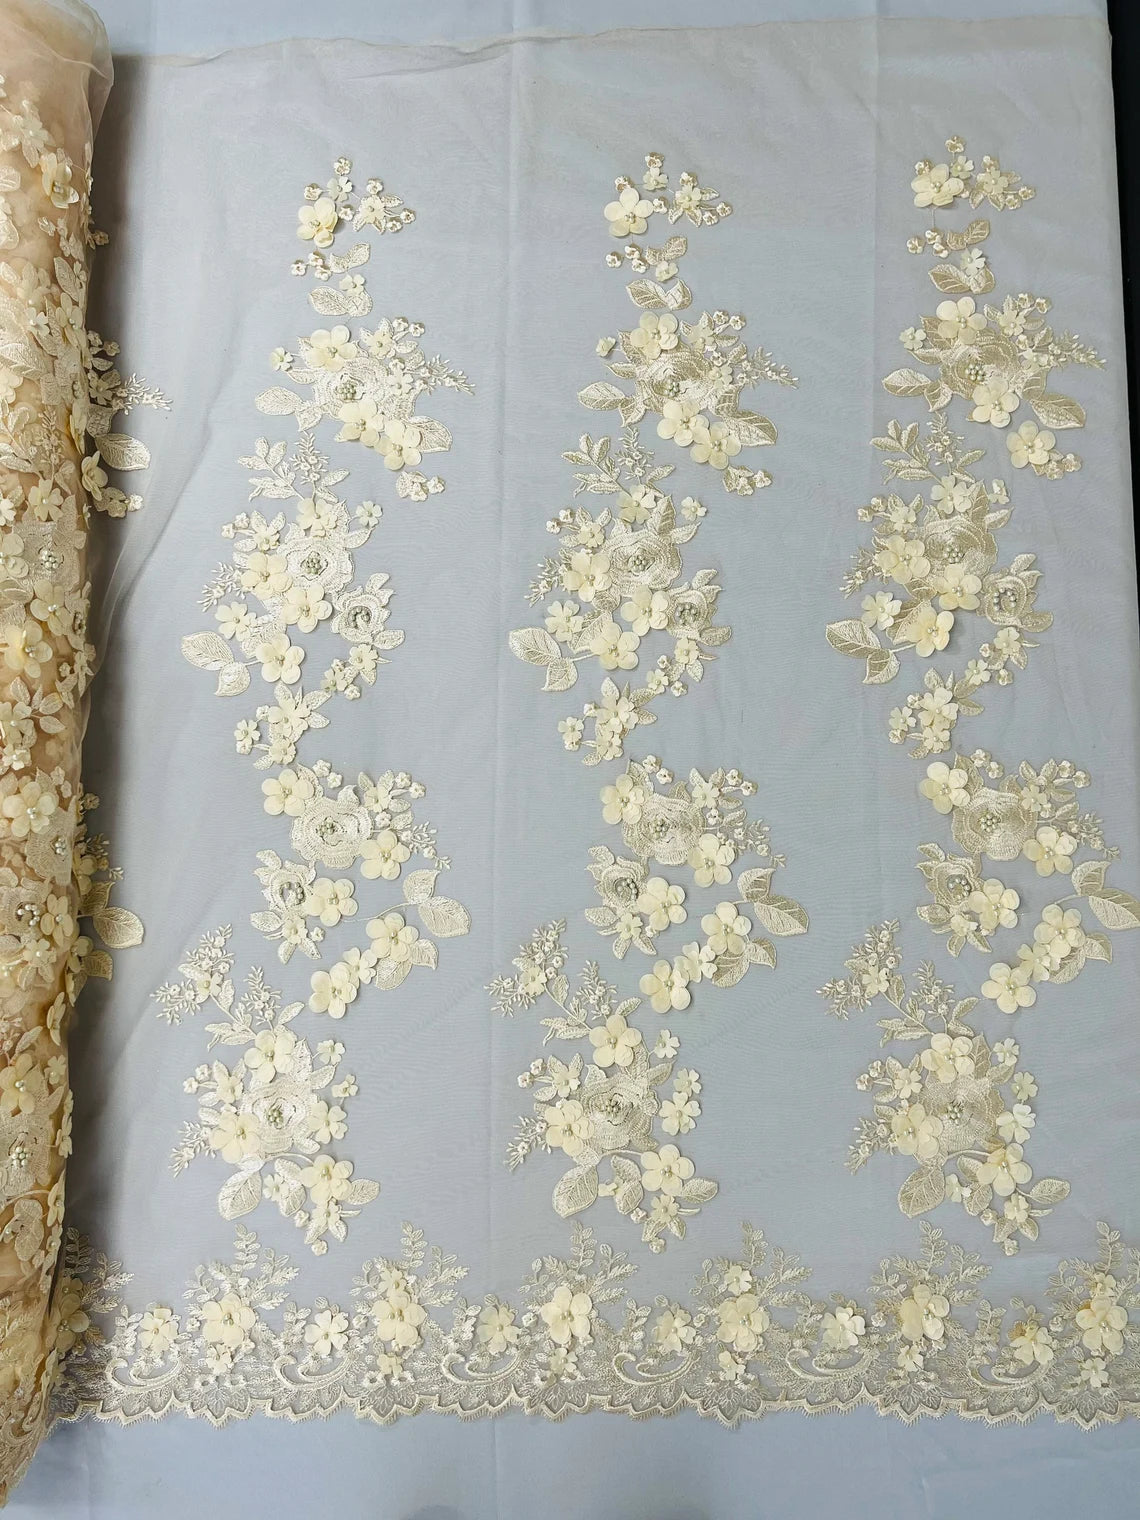 3D Flower Panels Fabric - Champagne - Flower Panels Bead Embroidered on Lace Fabric Sold By Yard